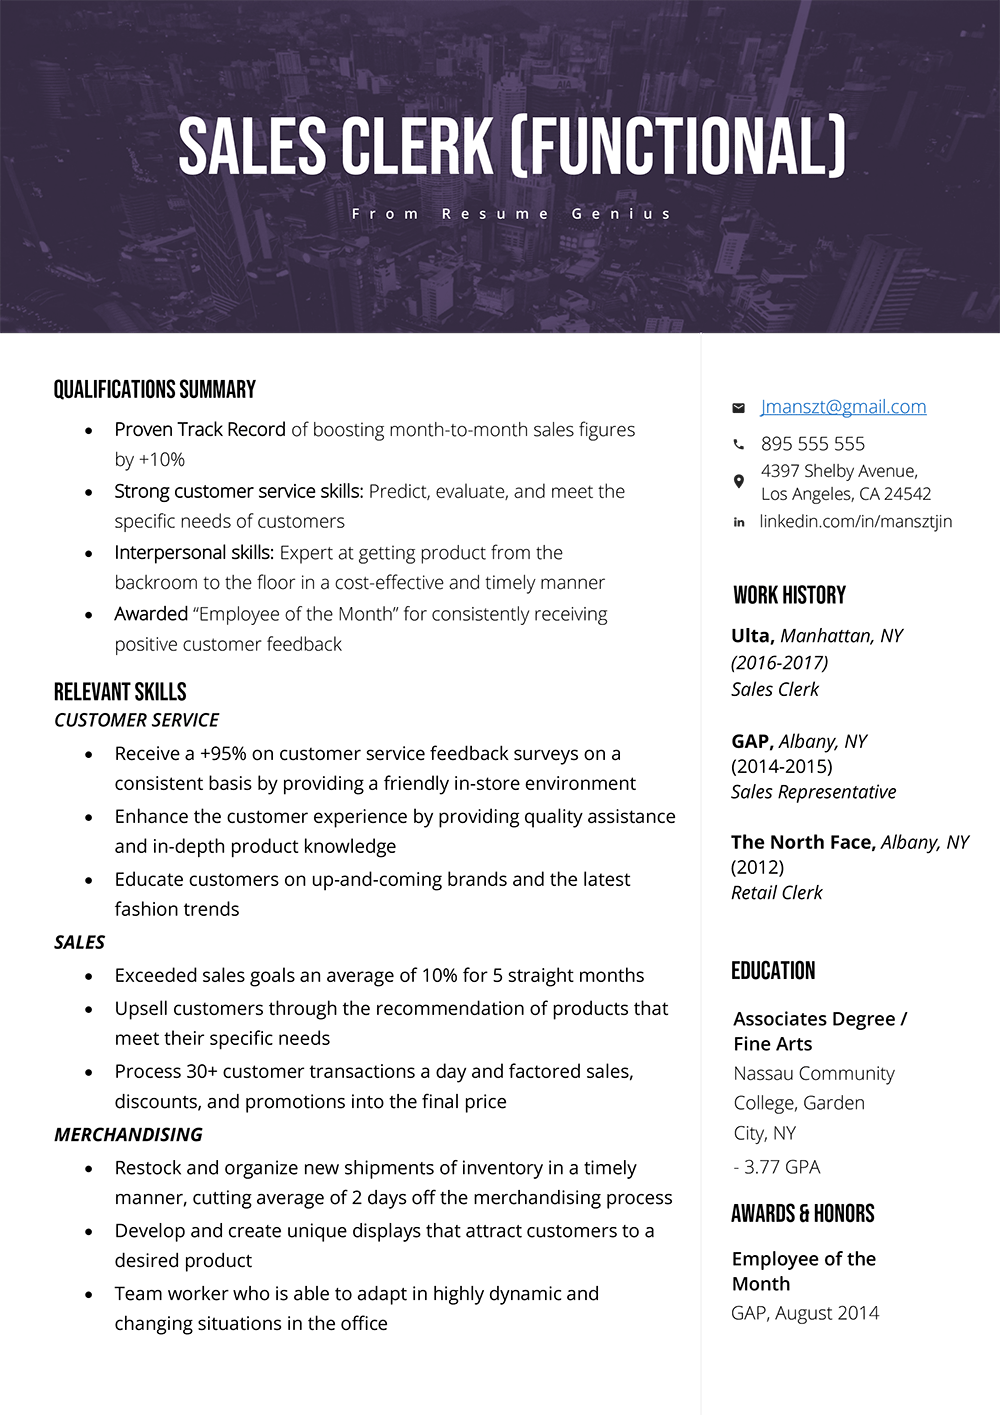 Functional Resume: Template, Examples, and Writing Guide